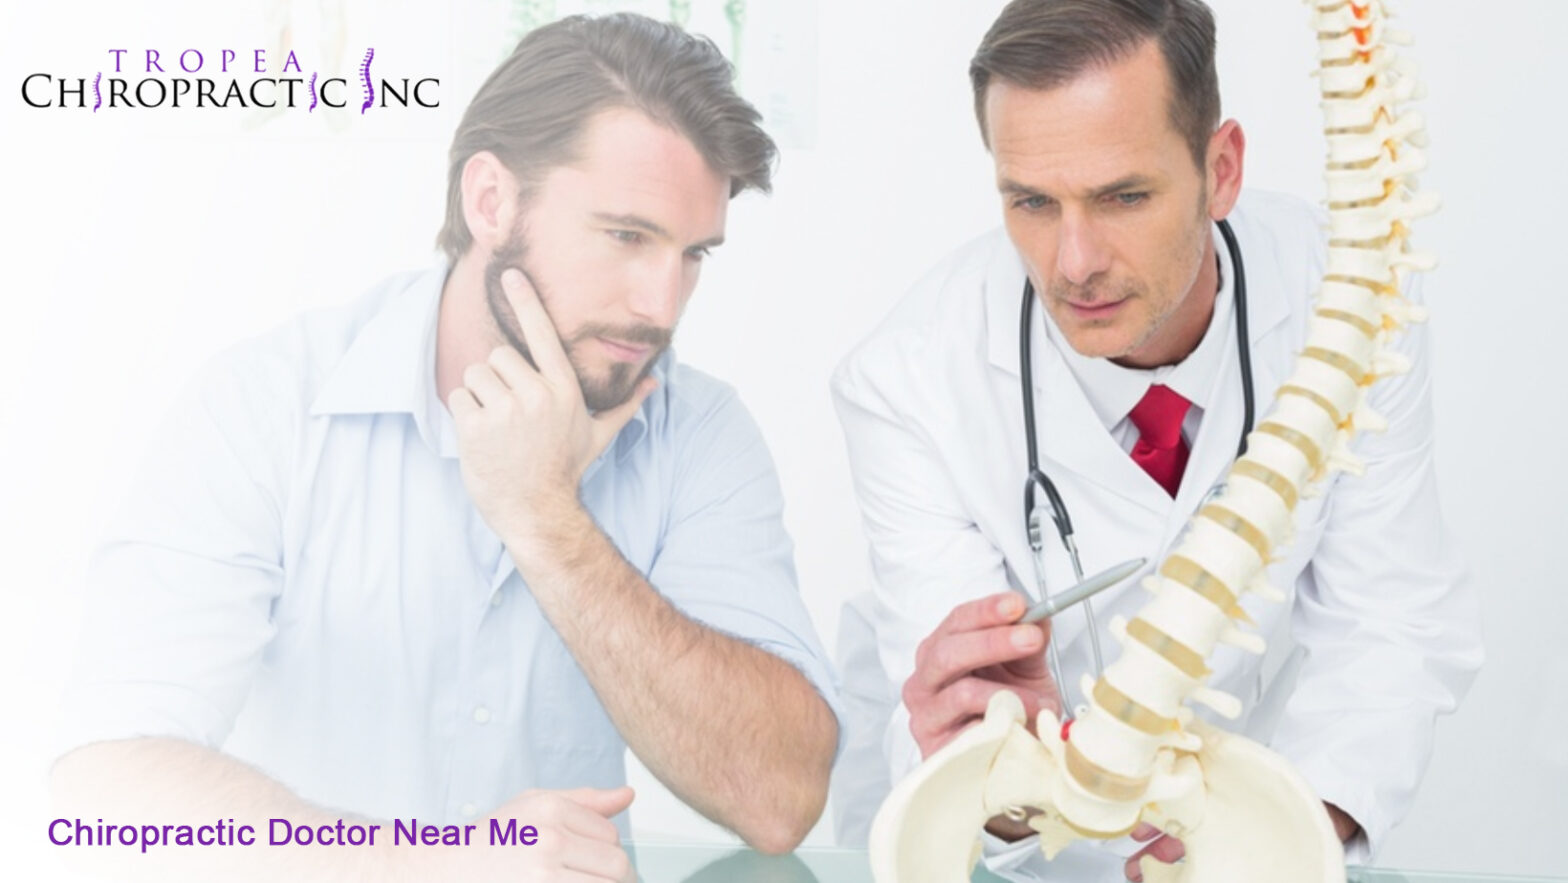 Do chiropractic doctors near me need X-Rays for treatment